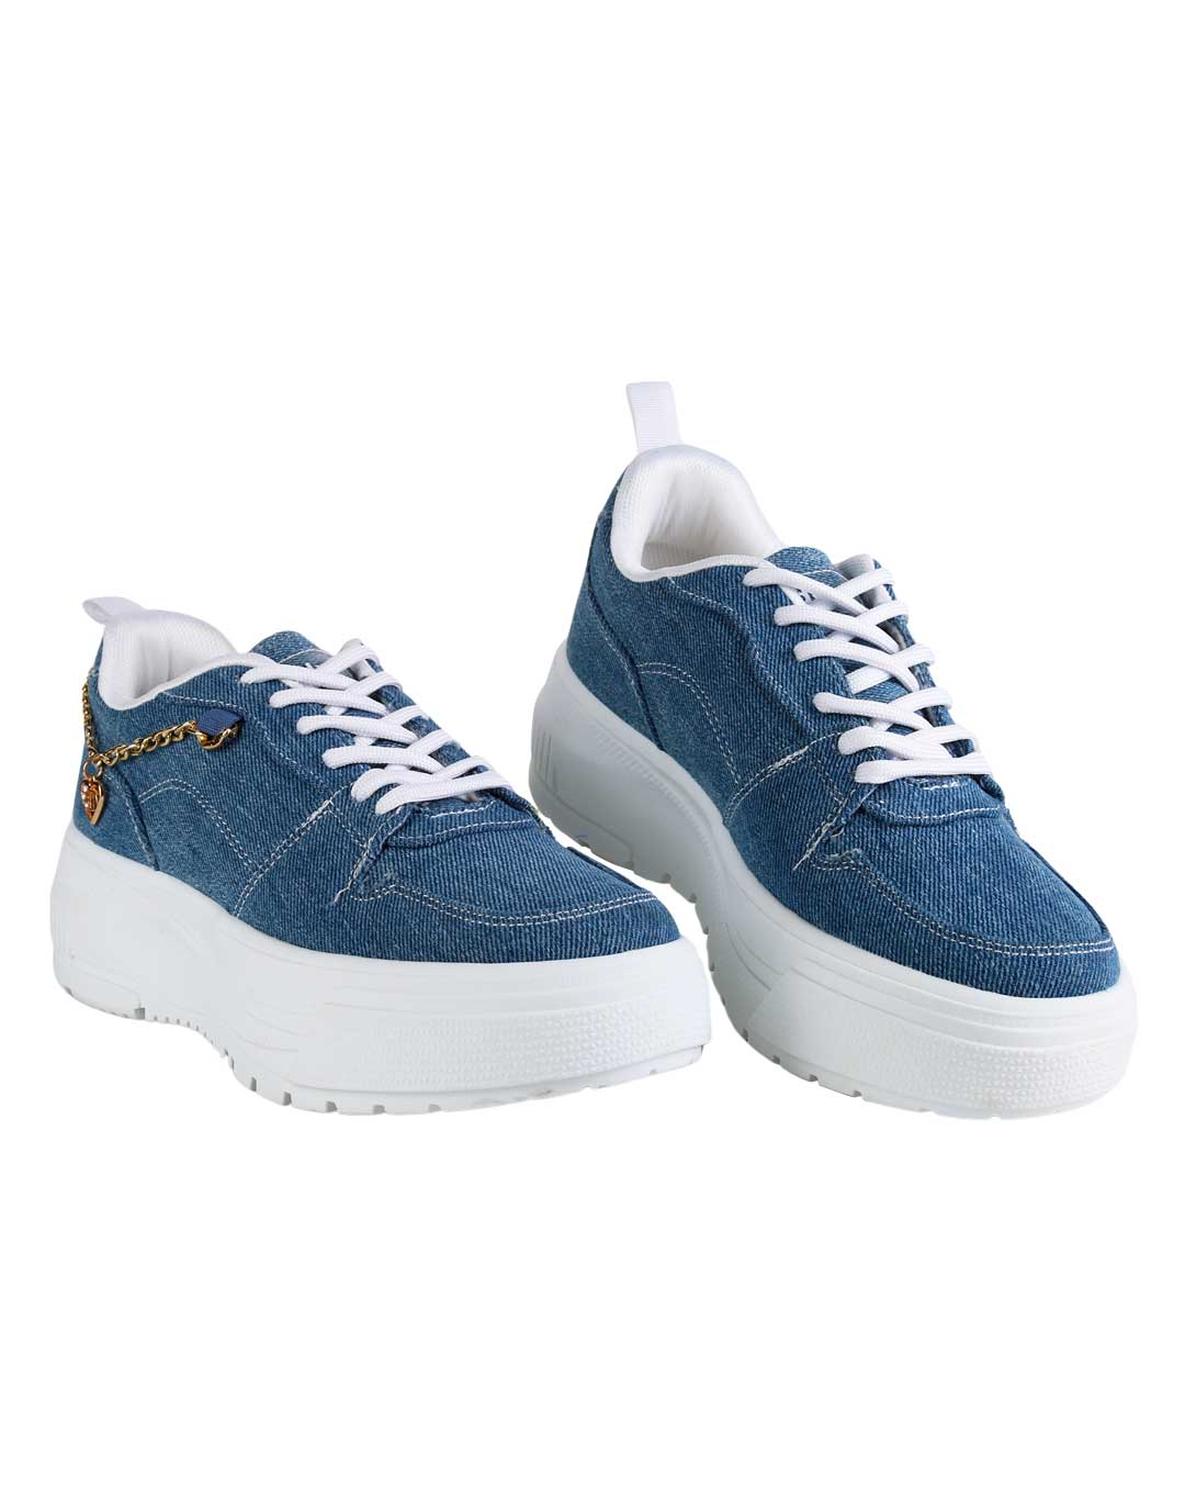 Tenis Casual Mujer Azul Daddy 13304004